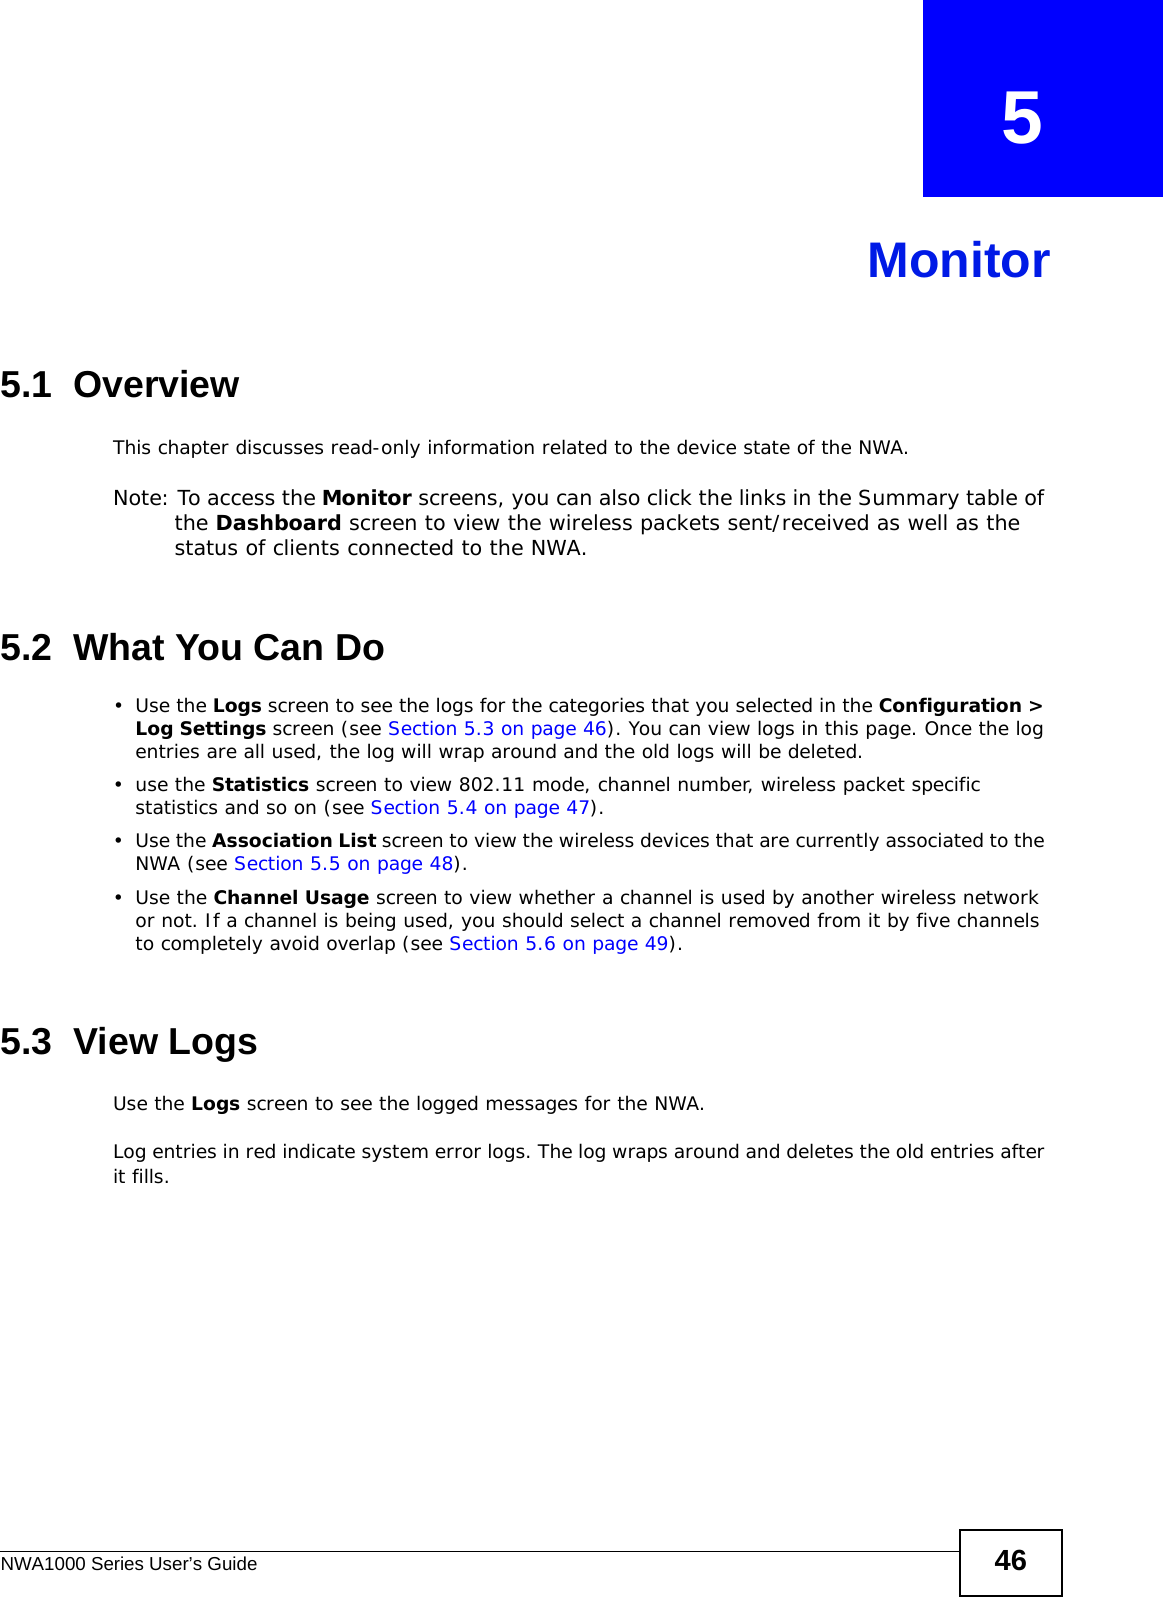 NWA1000 Series User’s Guide 46CHAPTER   5Monitor5.1  OverviewThis chapter discusses read-only information related to the device state of the NWA. Note: To access the Monitor screens, you can also click the links in the Summary table of the Dashboard screen to view the wireless packets sent/received as well as the status of clients connected to the NWA.5.2  What You Can Do•Use the Logs screen to see the logs for the categories that you selected in the Configuration &gt; Log Settings screen (see Section 5.3 on page 46). You can view logs in this page. Once the log entries are all used, the log will wrap around and the old logs will be deleted.•use the Statistics screen to view 802.11 mode, channel number, wireless packet specific statistics and so on (see Section 5.4 on page 47).•Use the Association List screen to view the wireless devices that are currently associated to the NWA (see Section 5.5 on page 48).•Use the Channel Usage screen to view whether a channel is used by another wireless network or not. If a channel is being used, you should select a channel removed from it by five channels to completely avoid overlap (see Section 5.6 on page 49). 5.3  View Logs Use the Logs screen to see the logged messages for the NWA. Log entries in red indicate system error logs. The log wraps around and deletes the old entries after it fills. 